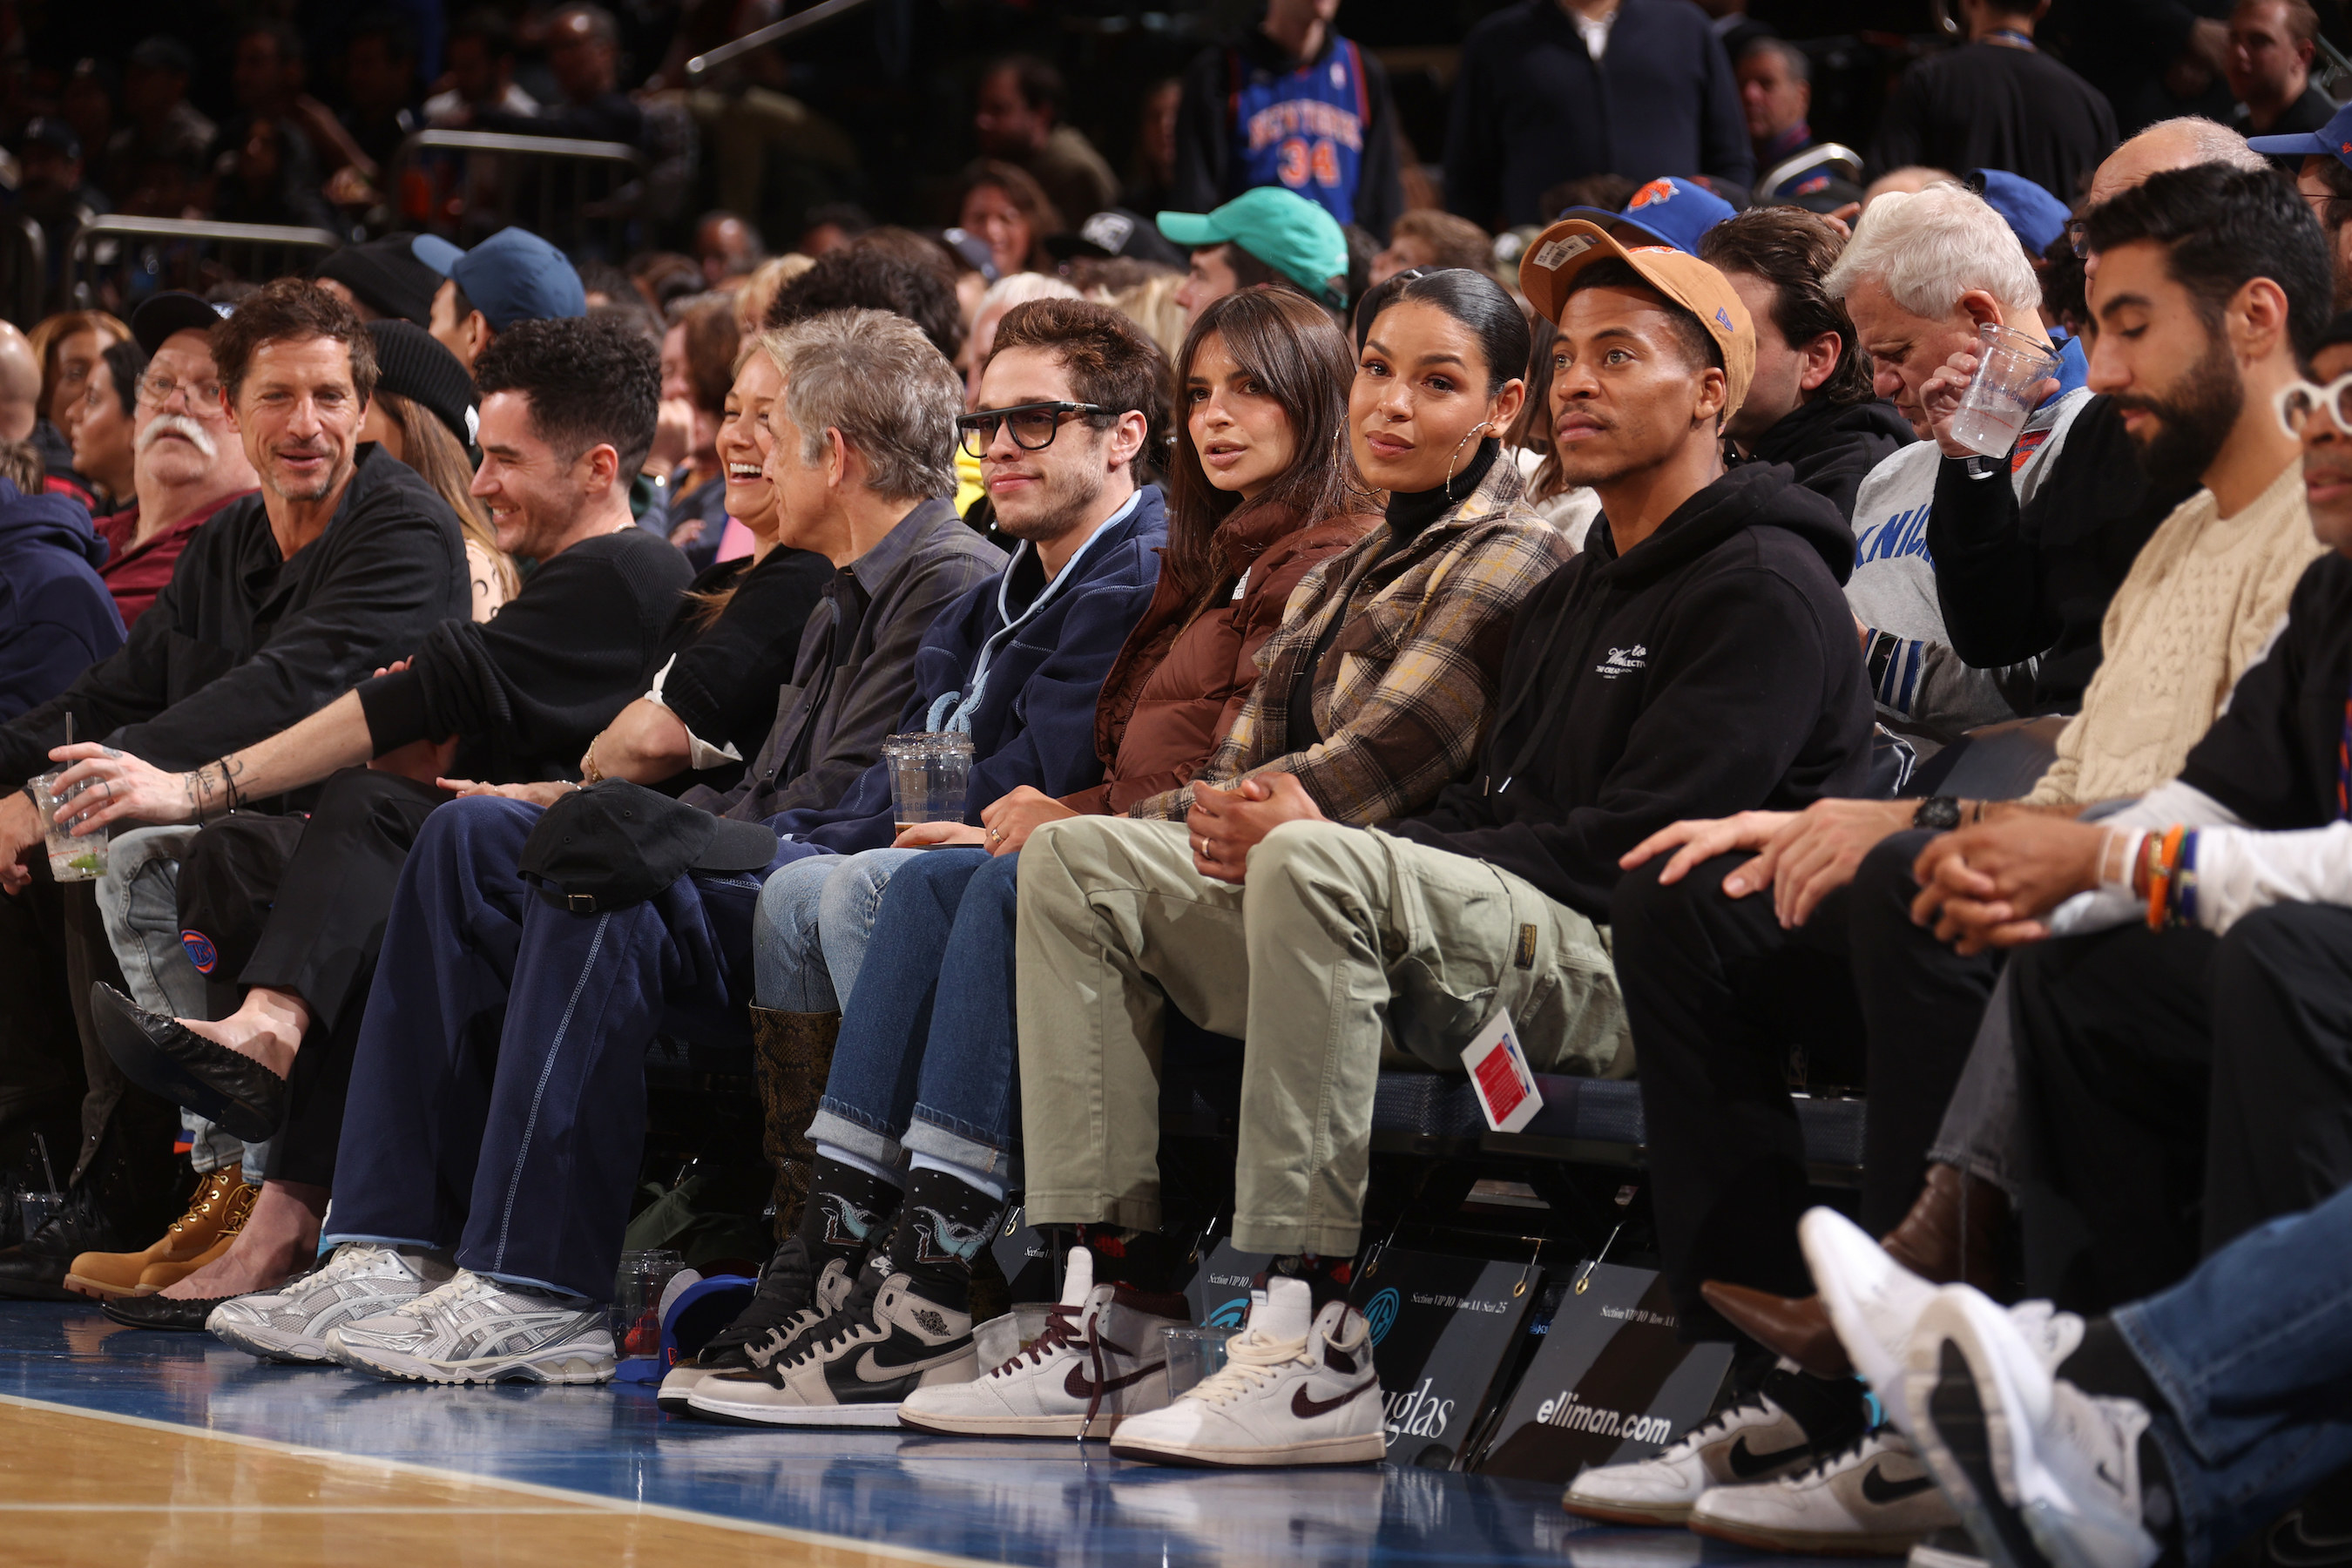 Pete and Emily sitting together at the Knicks game